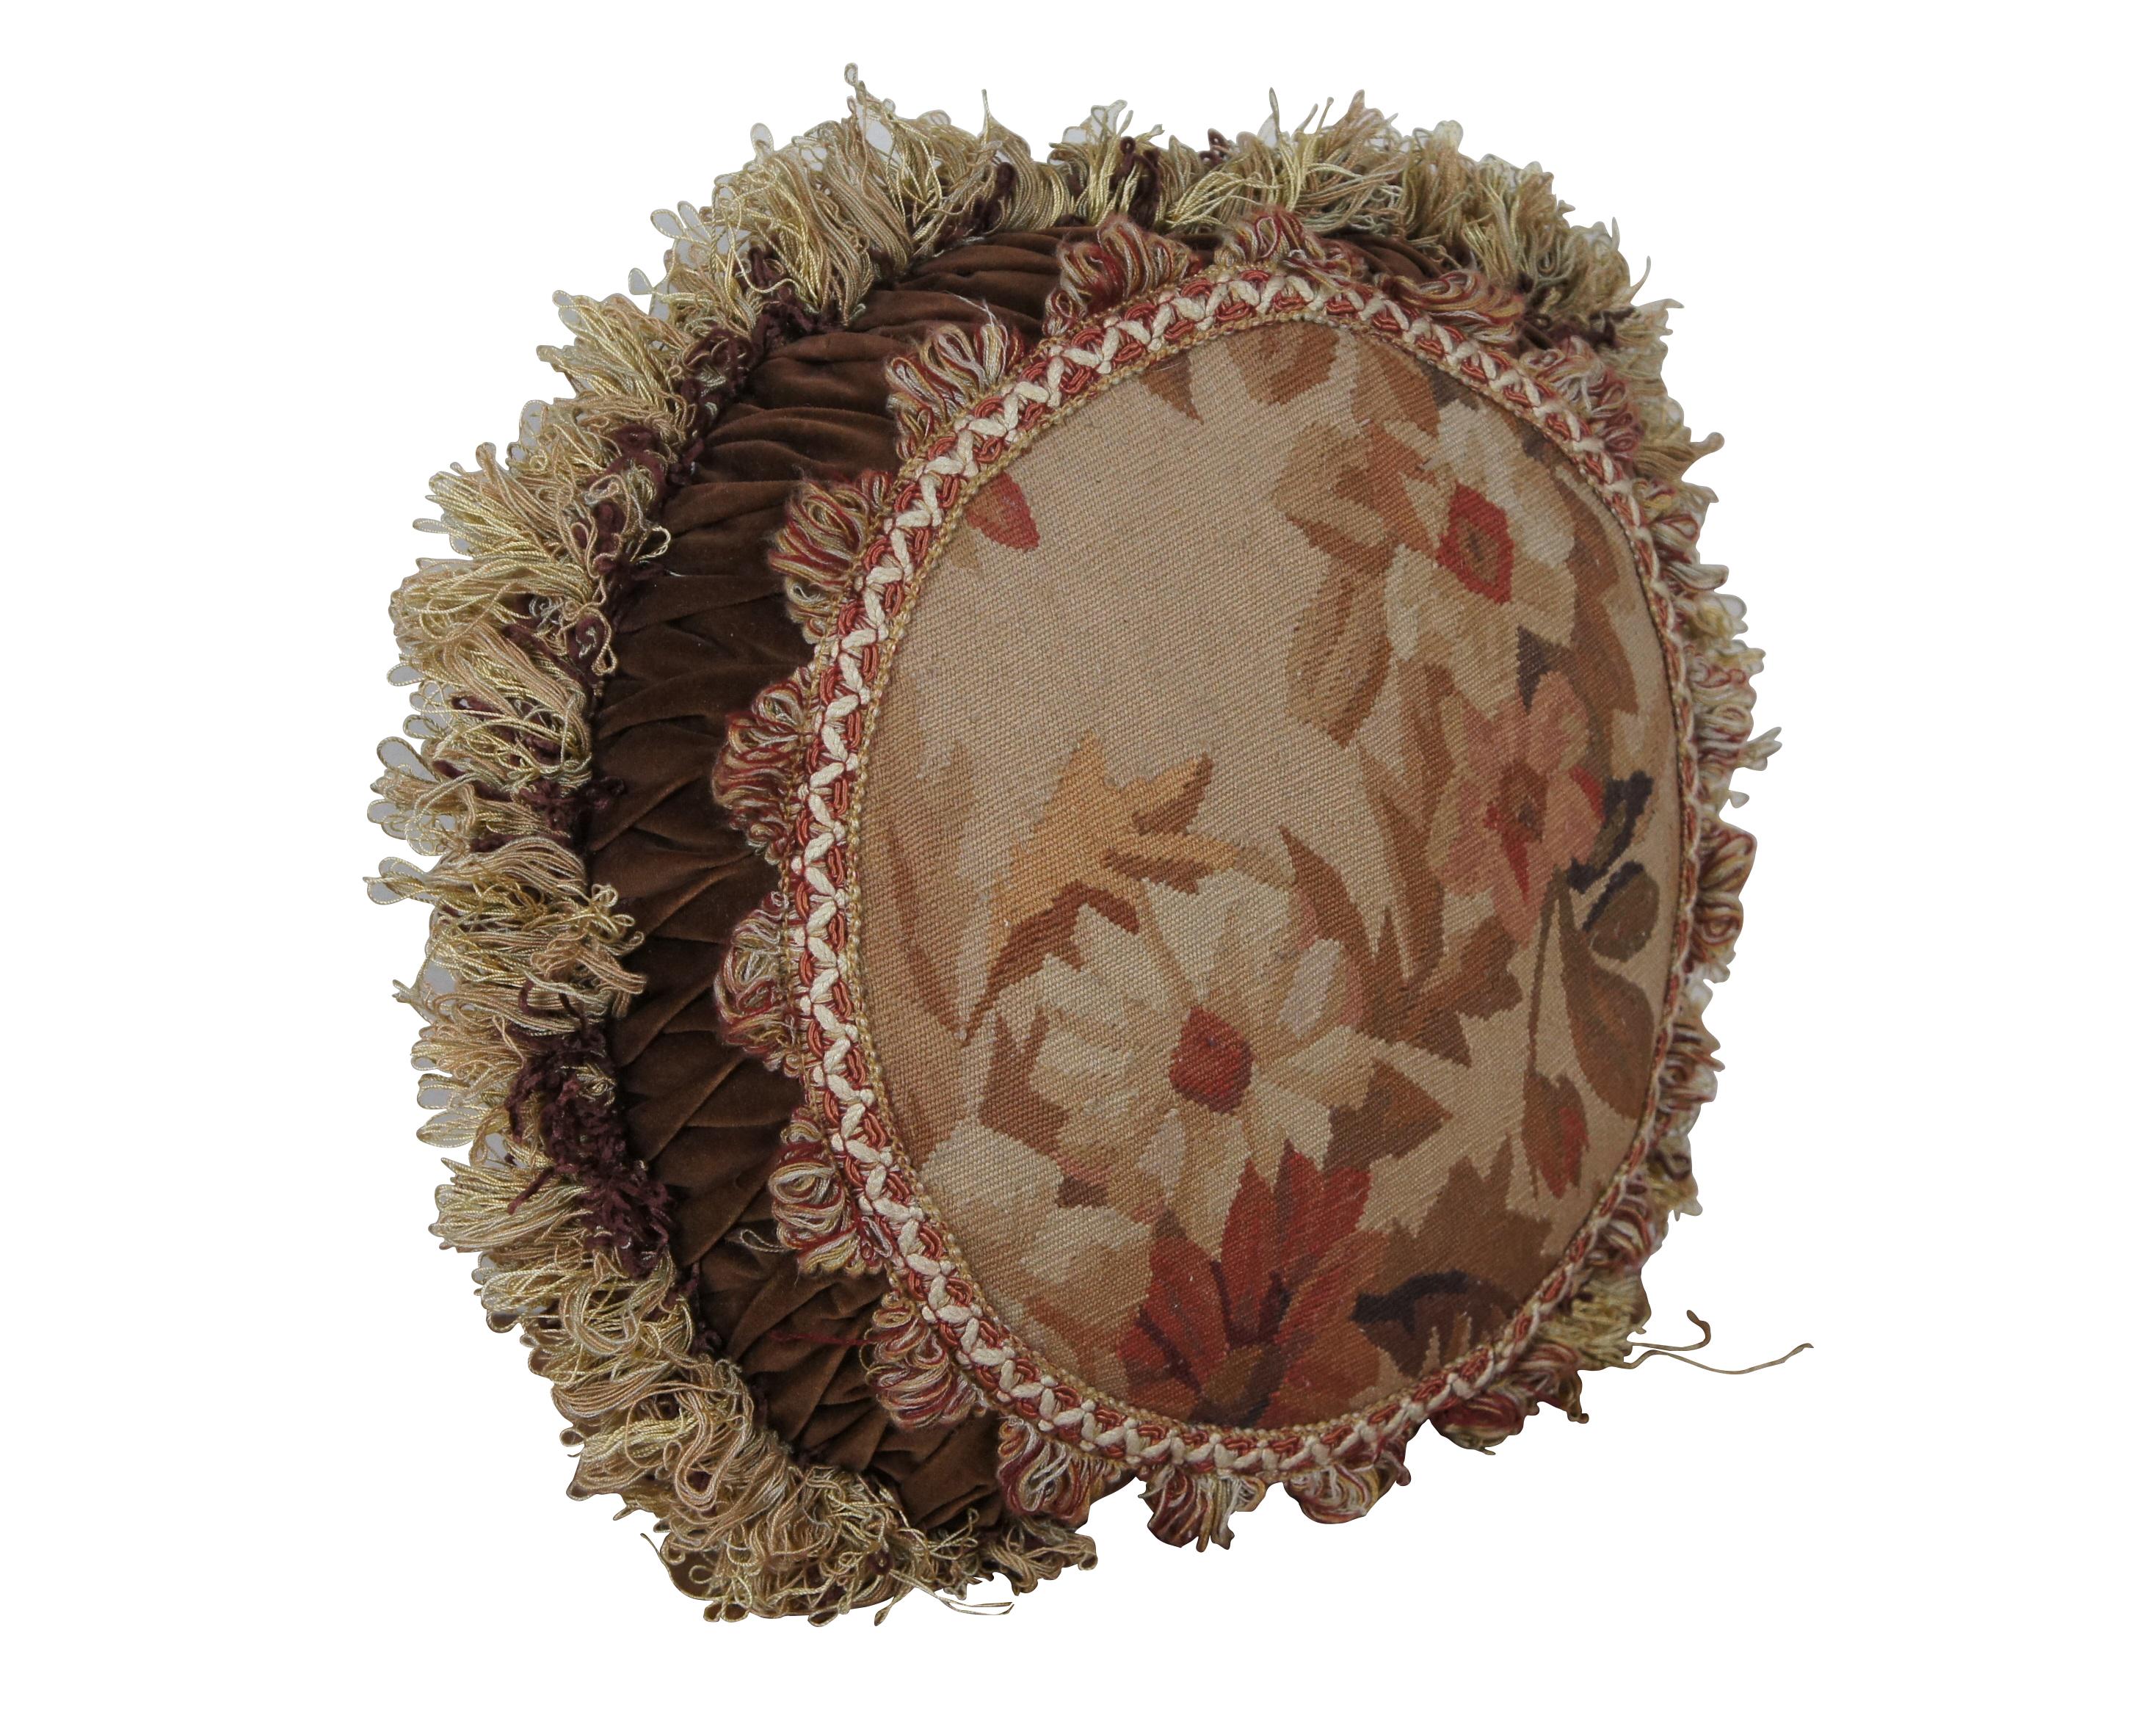 20th century round French style throw / accent pillow, embroidered with brown, cream and rust colored flowers, framed in white and rose colored trim, ruched velvet, and burgundy and cream colored fringe. Brown velour / velvet back with zipper